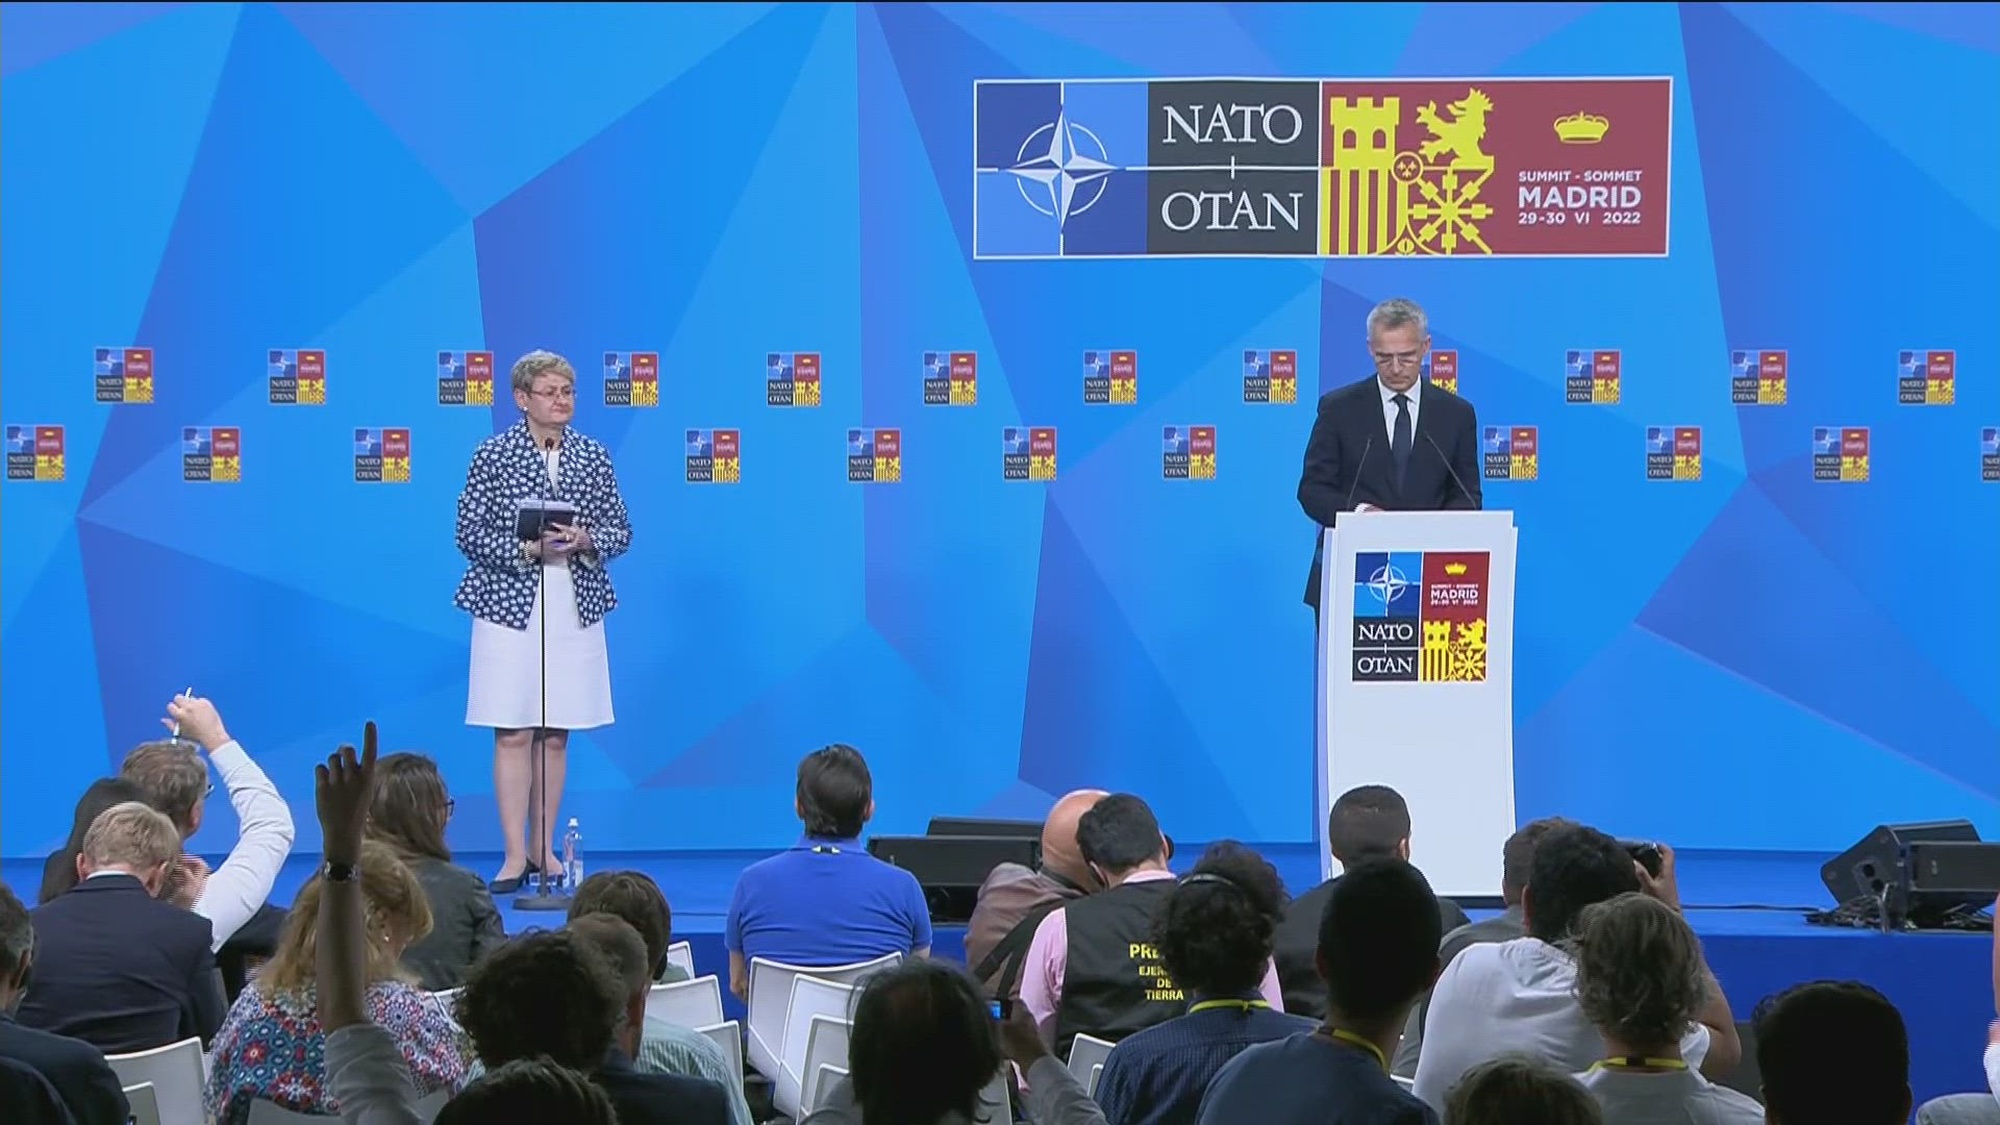 Final press conference by NATO Secretary General Jens Stoltenberg following the NATO Summit in Madrid on 30 June 2022.